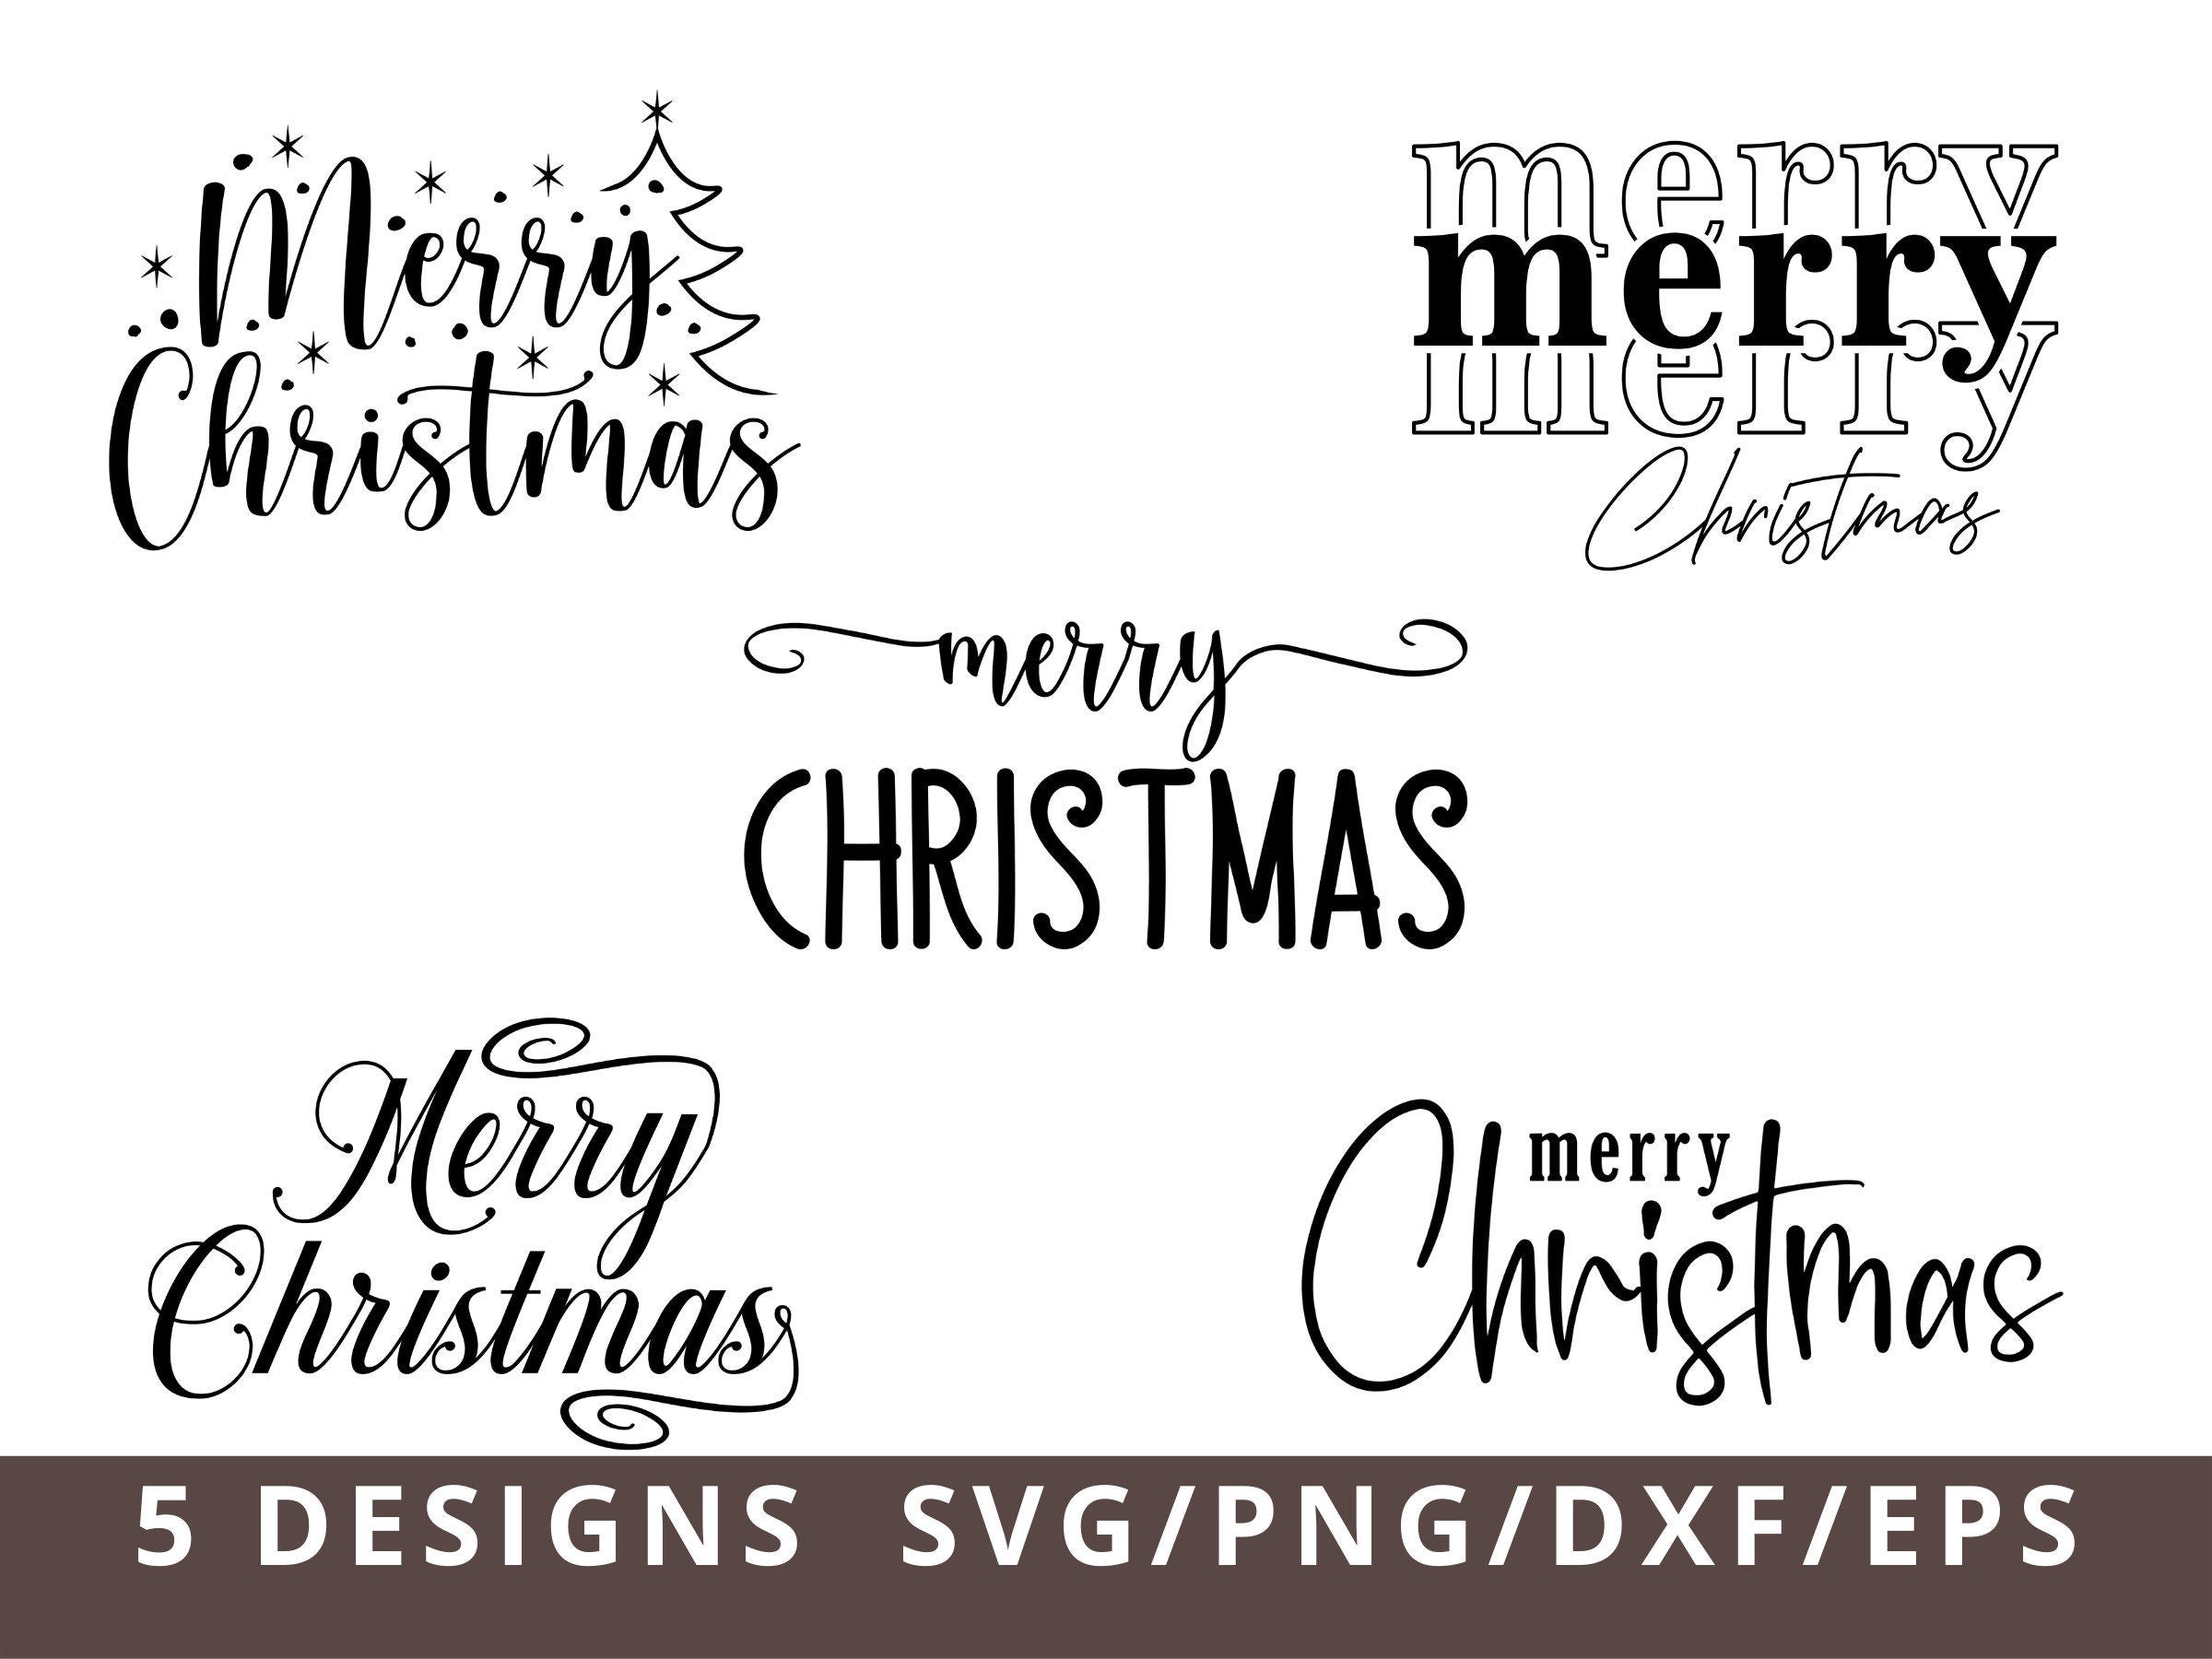 Merry Christmas Svg, Christmas Svg, Digital Cut file, Winter Svg, Merry Christmas Png Svg Dxf, Christmas Tree Svg, Commercial Use